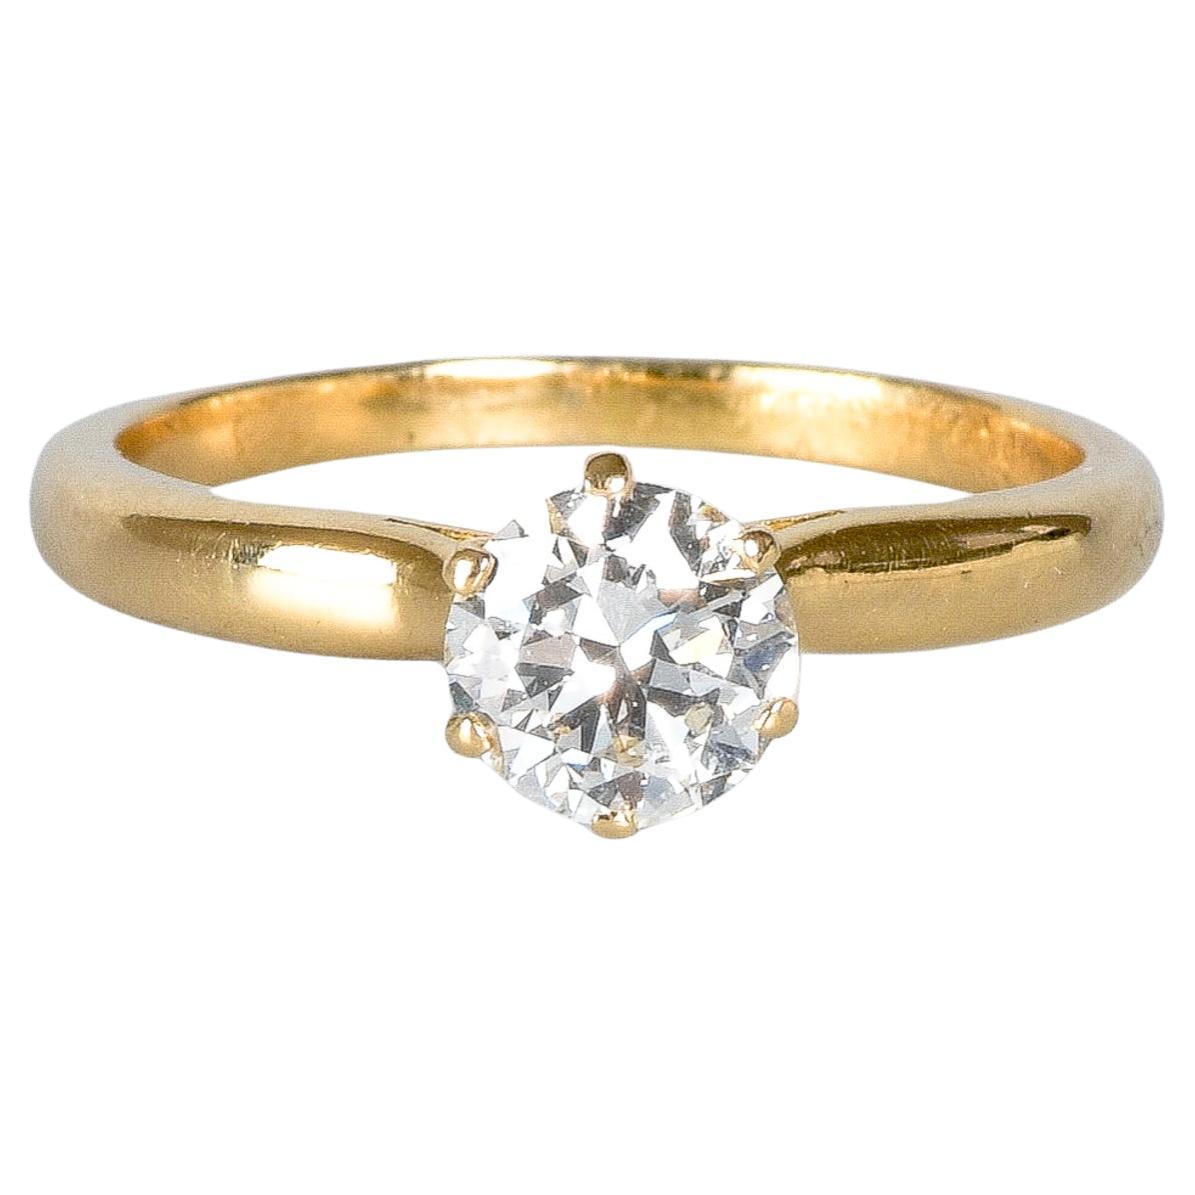 Solitaire wedding ring in 18 carat gold set with 1 round brilliant cut diamond For Sale